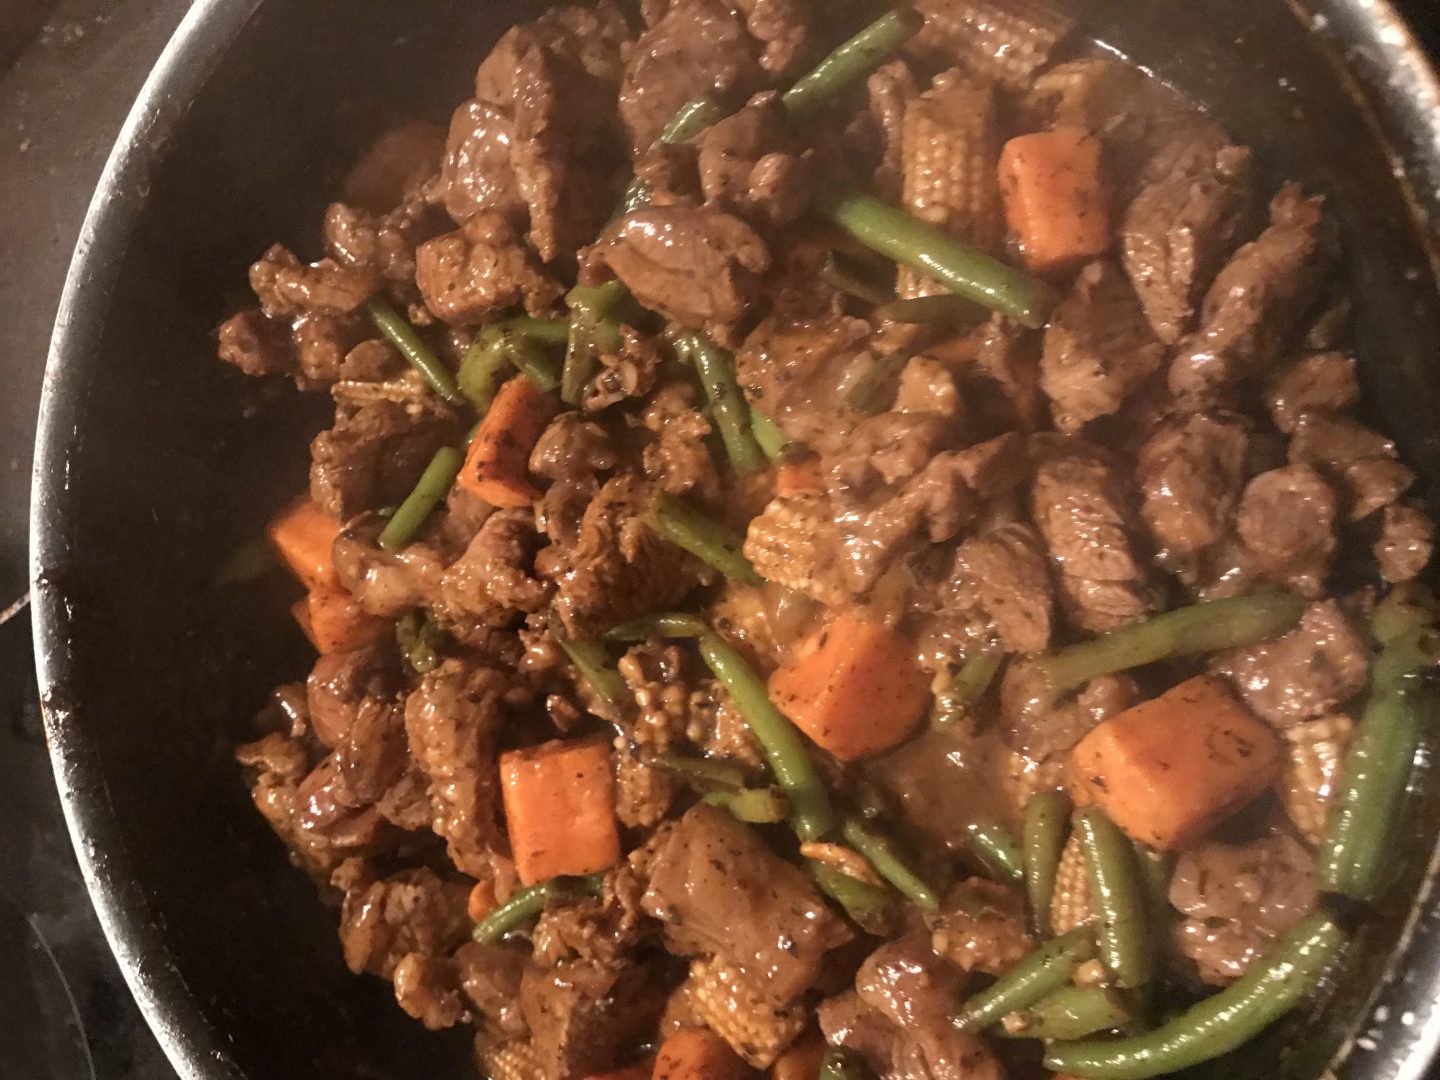 Minted Lamb Stir Fry - cooked